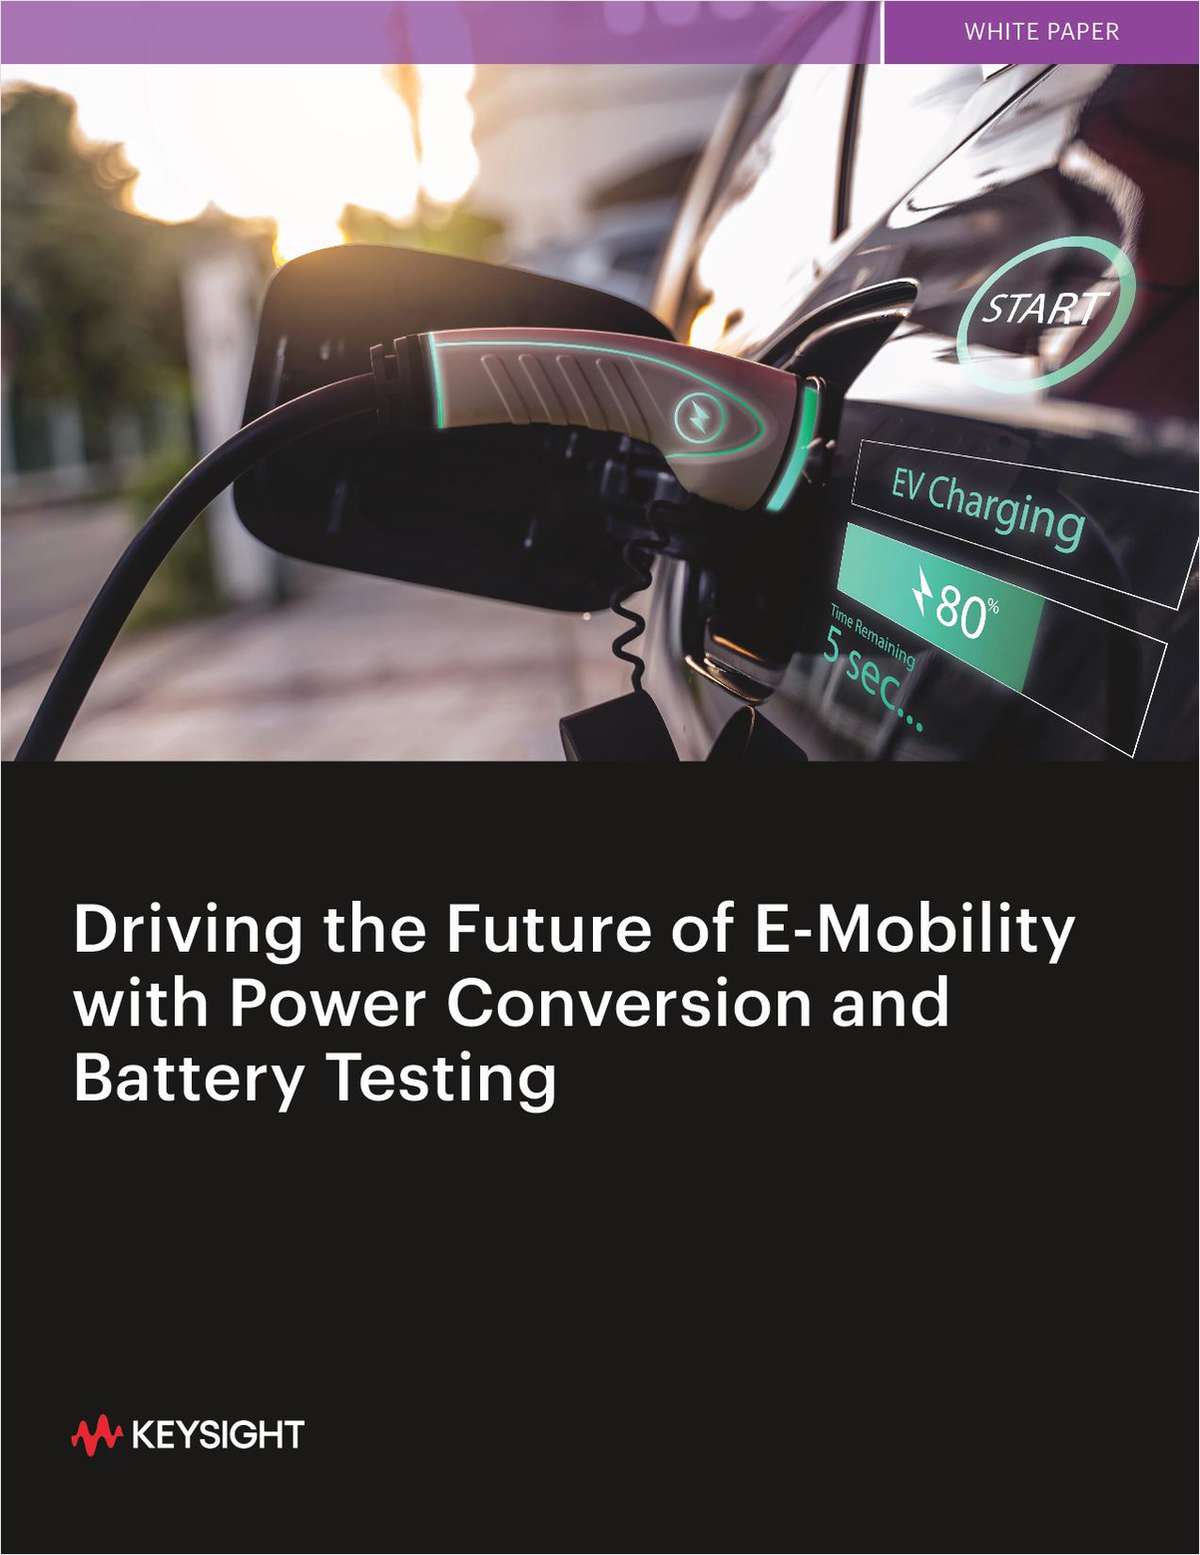 Power Conversion and Battery Testing: Driving the Future of E-Mobility